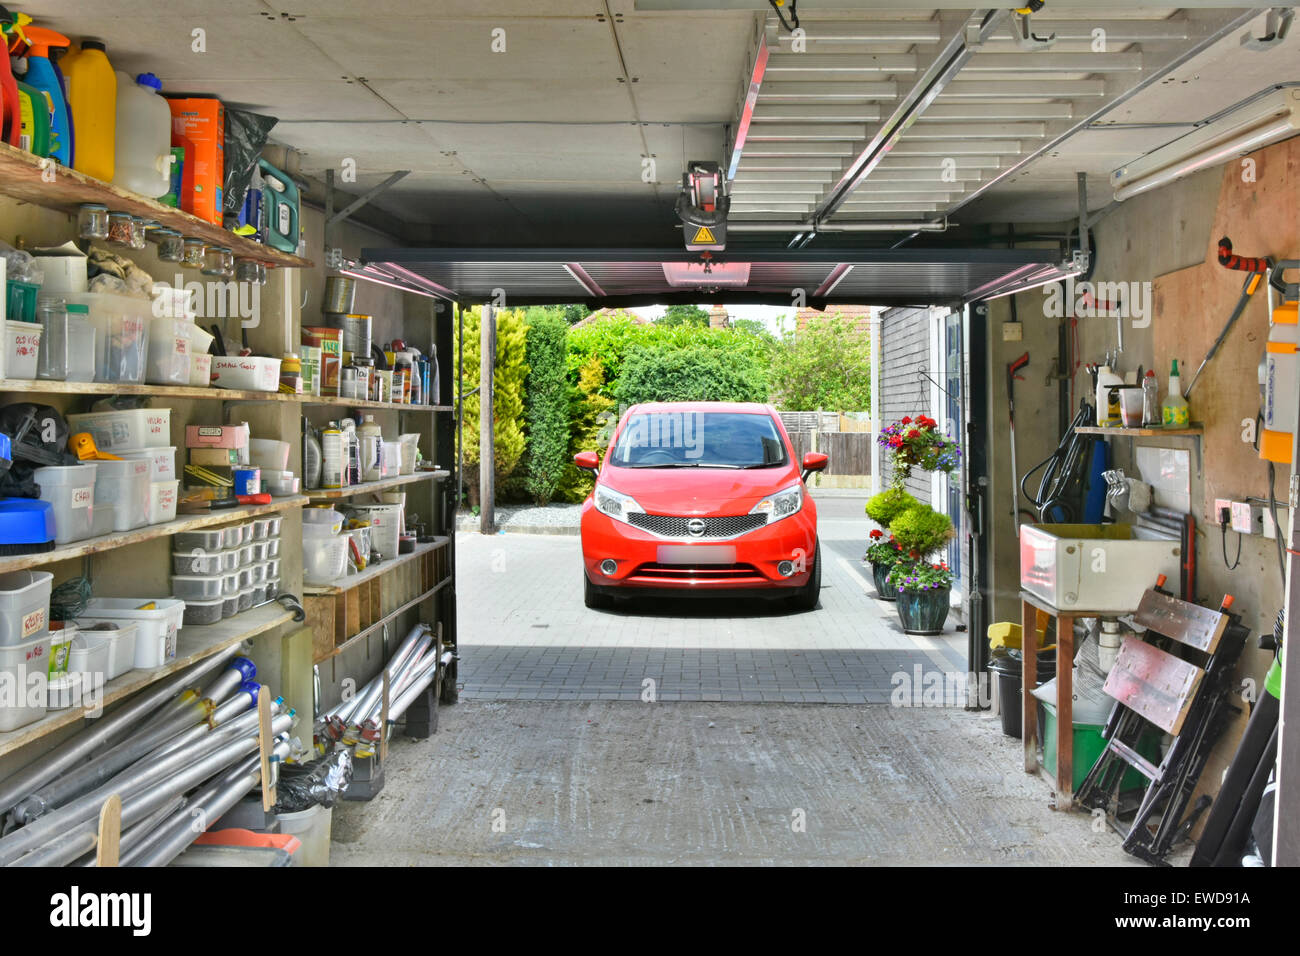 Car on driveway from inside garage attached to house used for car parking & household storage of paraphernalia tools & garden sundries Essex England Stock Photo